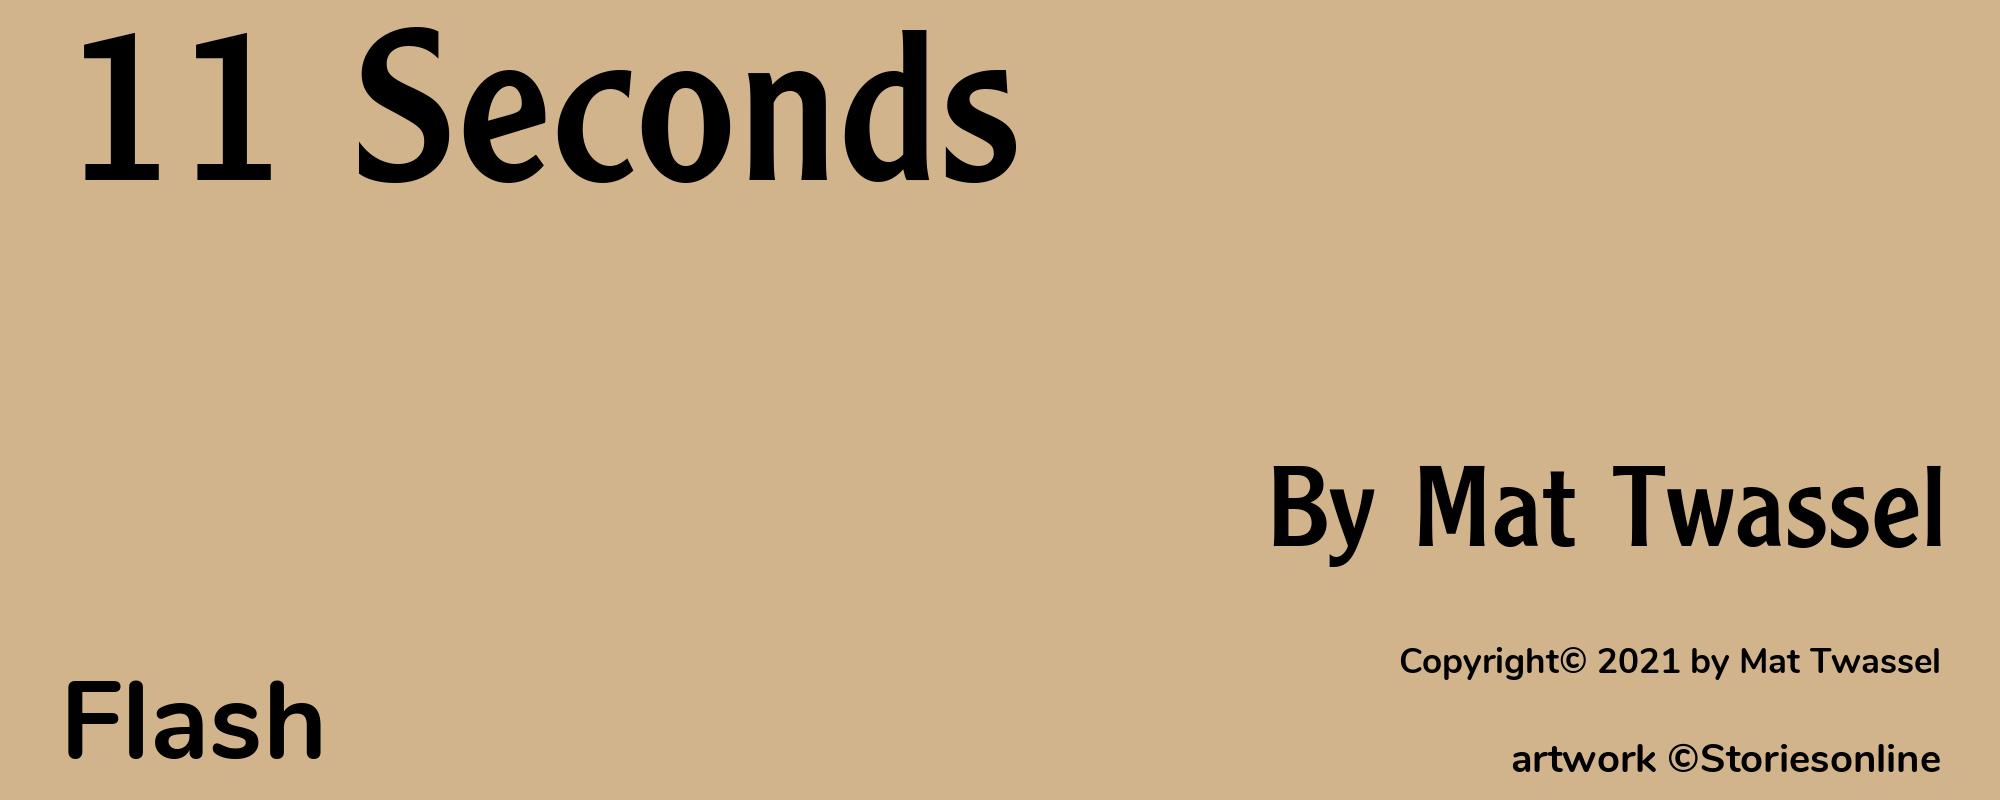 11 Seconds - Cover